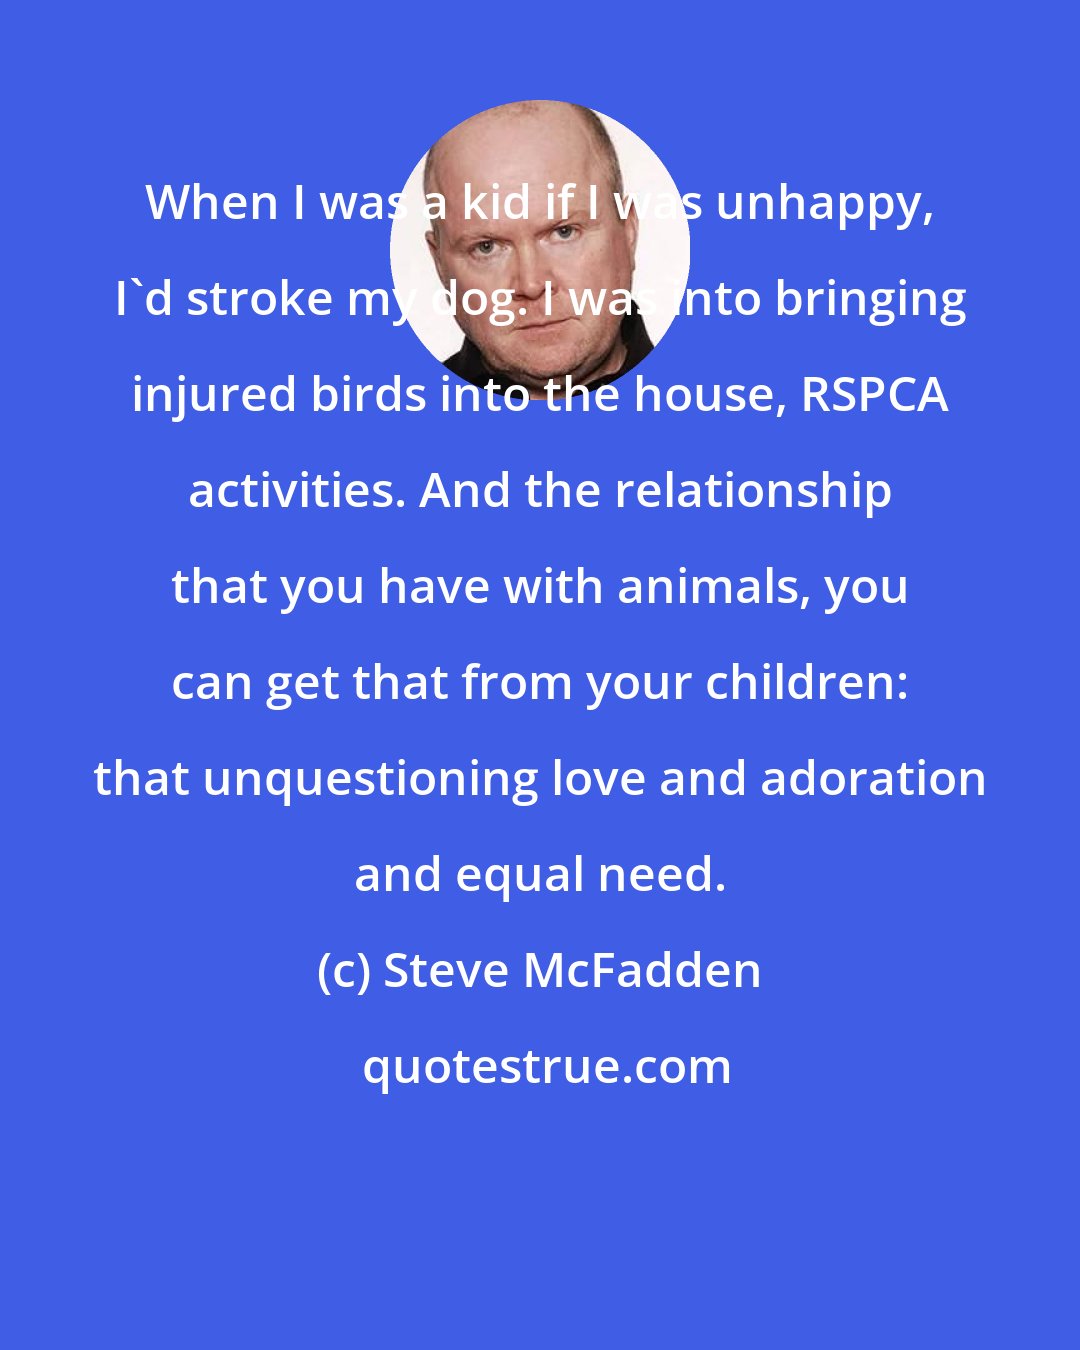 Steve McFadden: When I was a kid if I was unhappy, I'd stroke my dog. I was into bringing injured birds into the house, RSPCA activities. And the relationship that you have with animals, you can get that from your children: that unquestioning love and adoration and equal need.